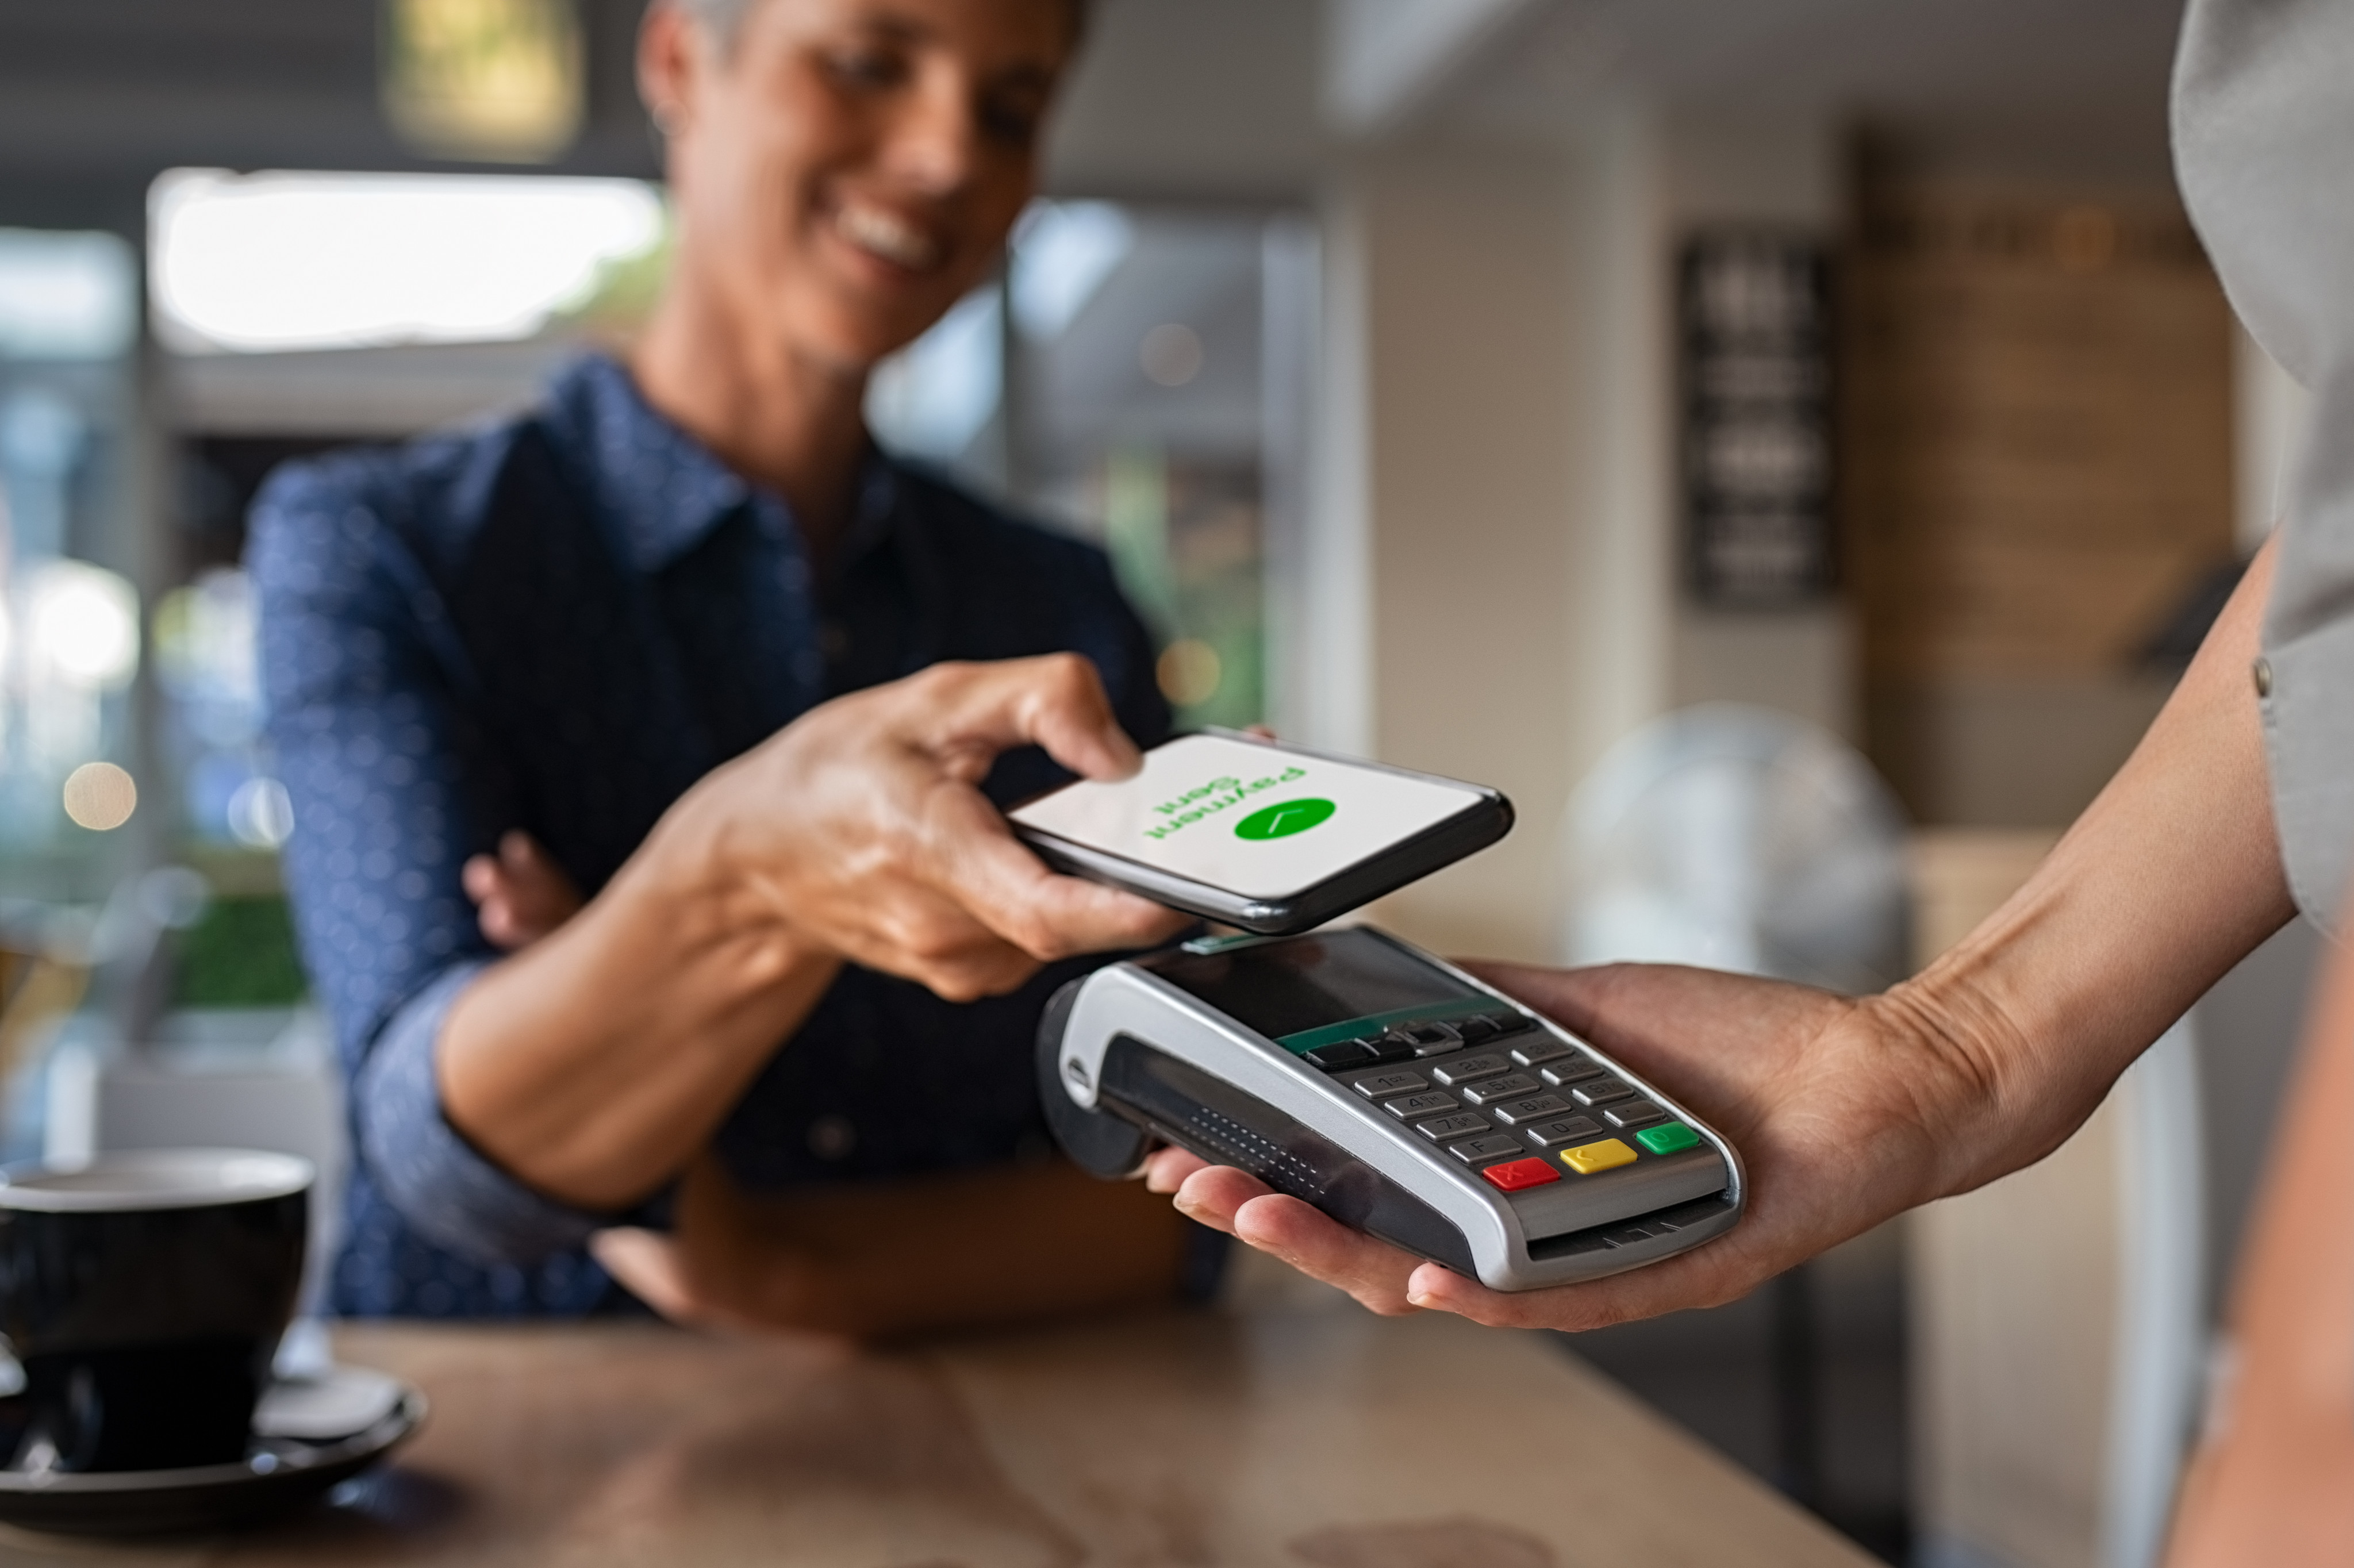 Merchants can expect seamless payments when they tap on tokenisation technology as its unique digital identifiers, or tokens, ensure uninterrupted payments even when customers’ card credentials change. Photo: Shutterstock